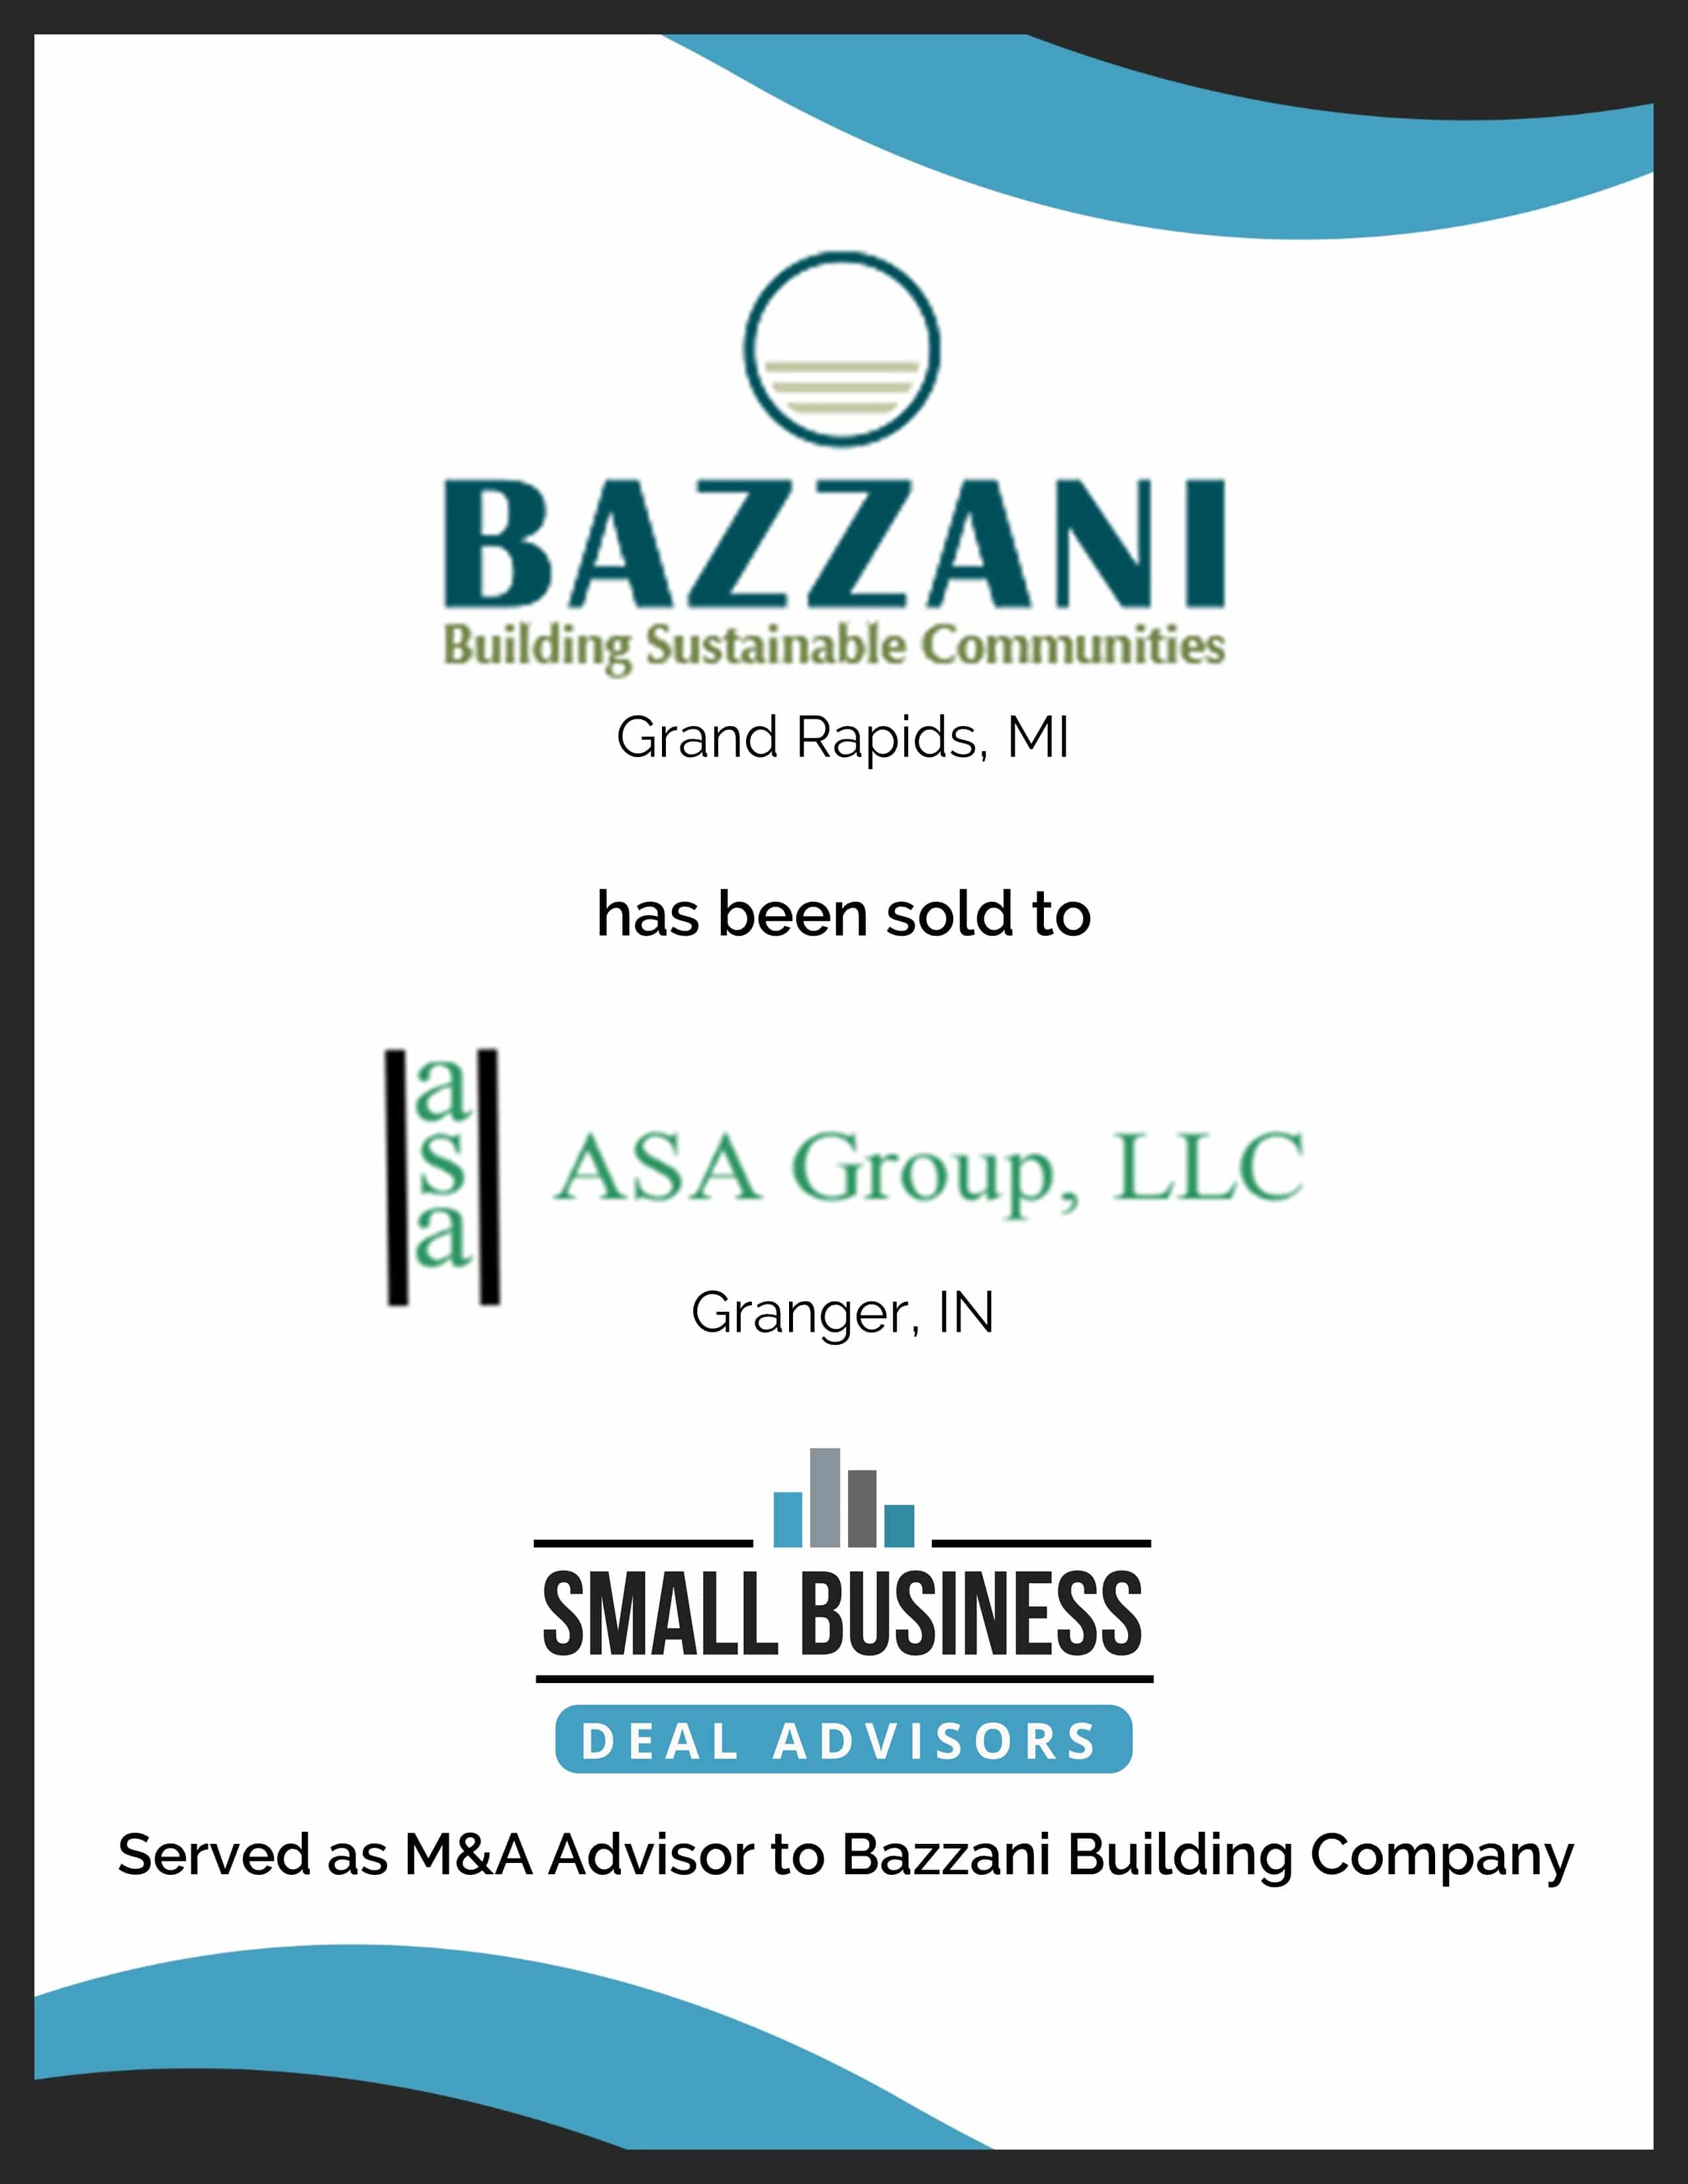 Bazzani Building Company has been sold to ASA Group LLC